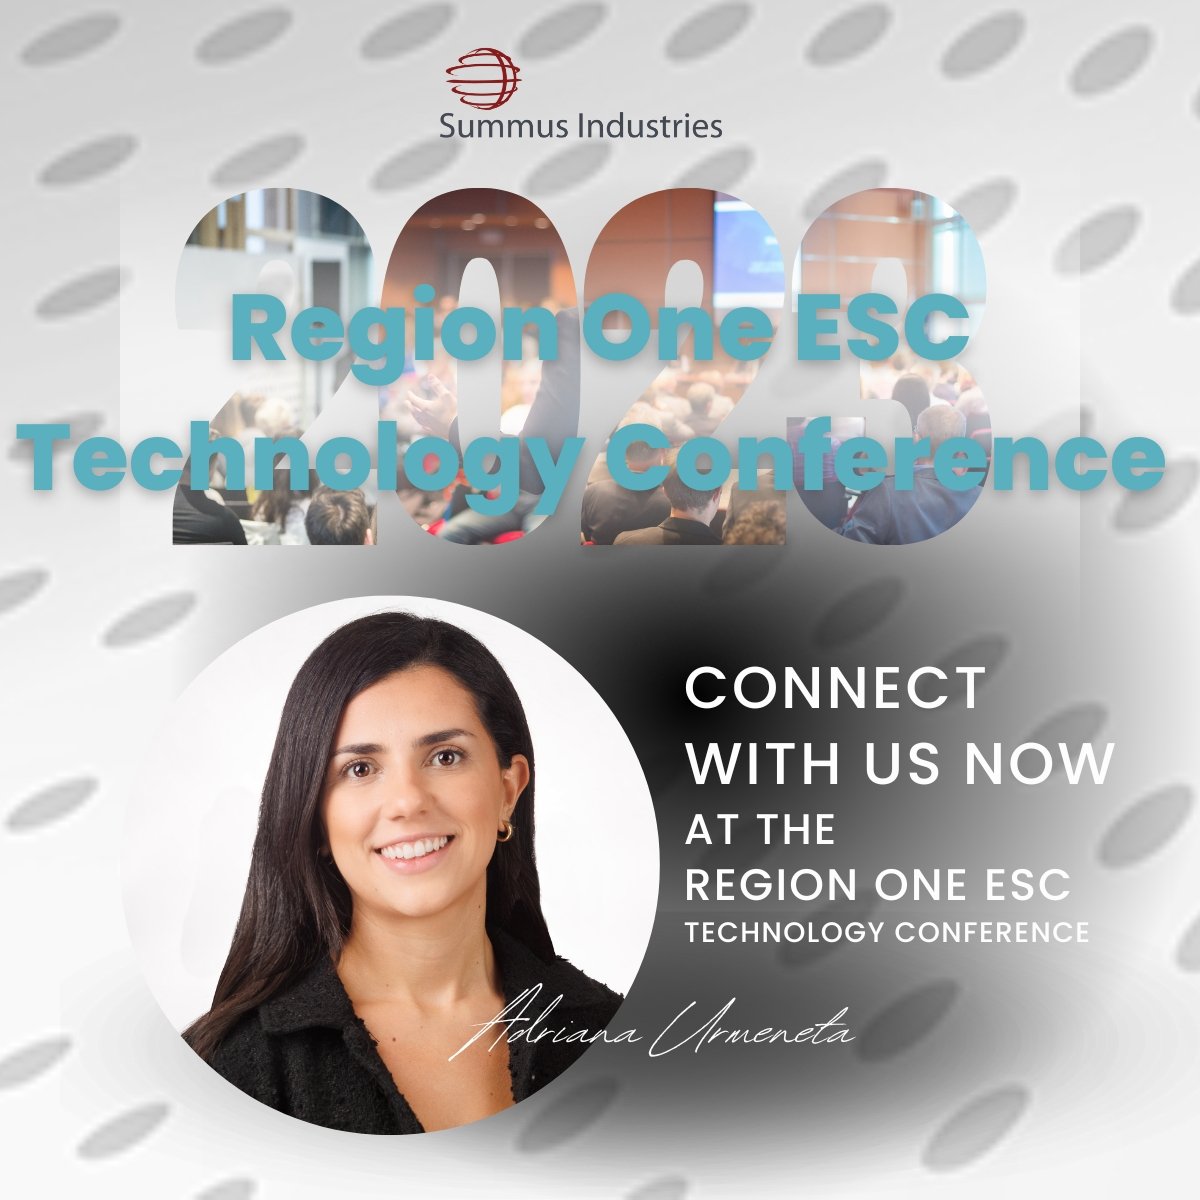 Region One ESC Technology Conference